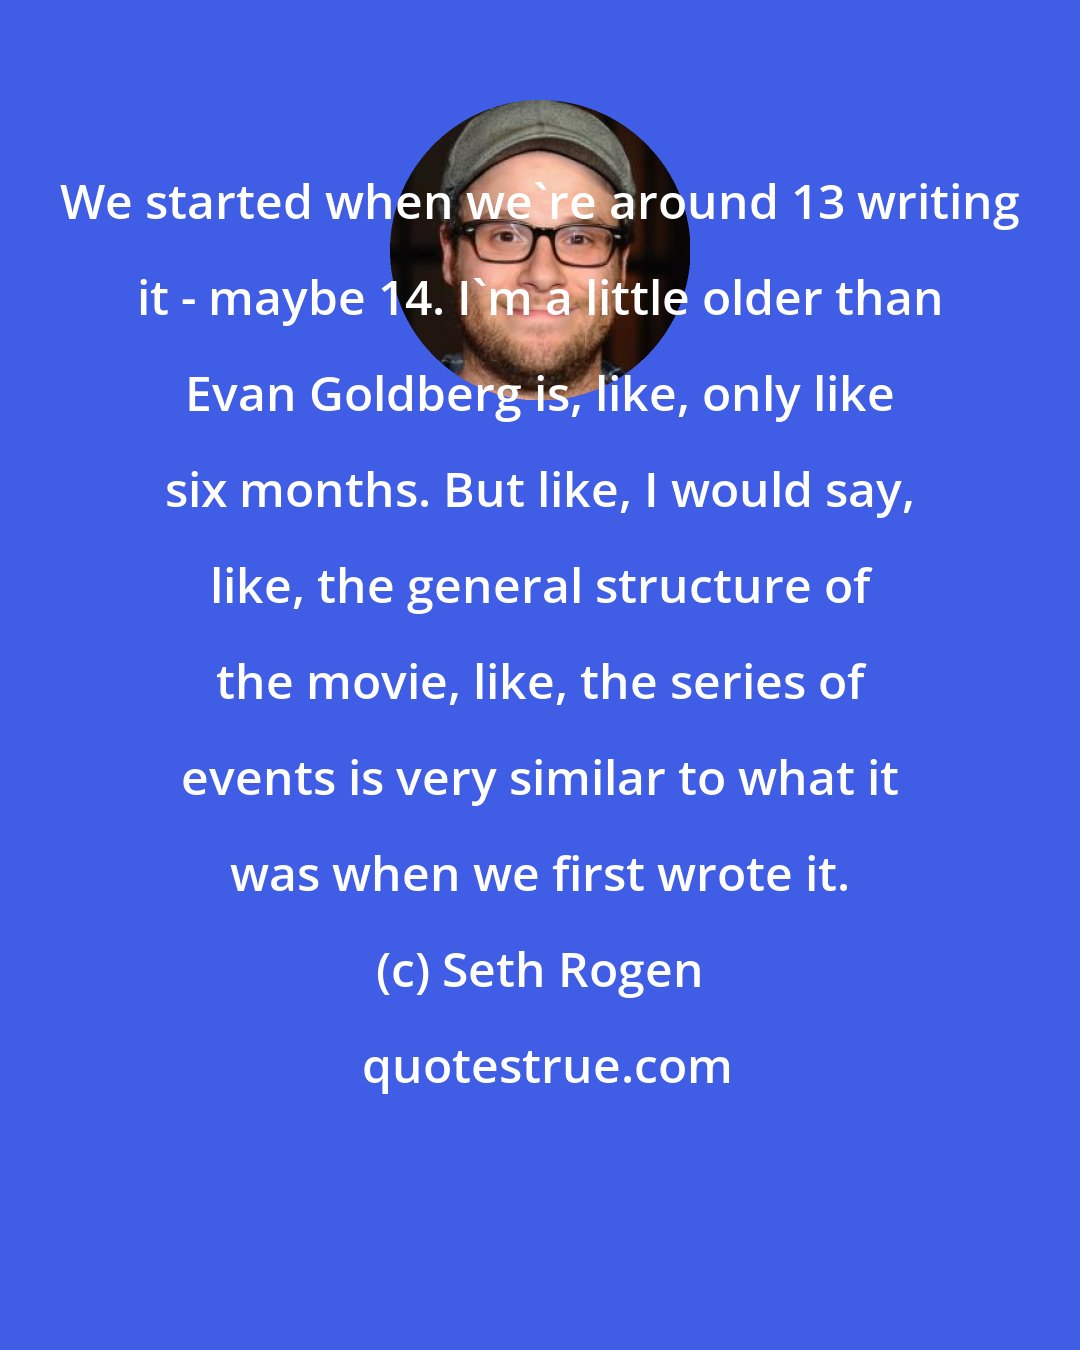 Seth Rogen: We started when we're around 13 writing it - maybe 14. I'm a little older than Evan Goldberg is, like, only like six months. But like, I would say, like, the general structure of the movie, like, the series of events is very similar to what it was when we first wrote it.